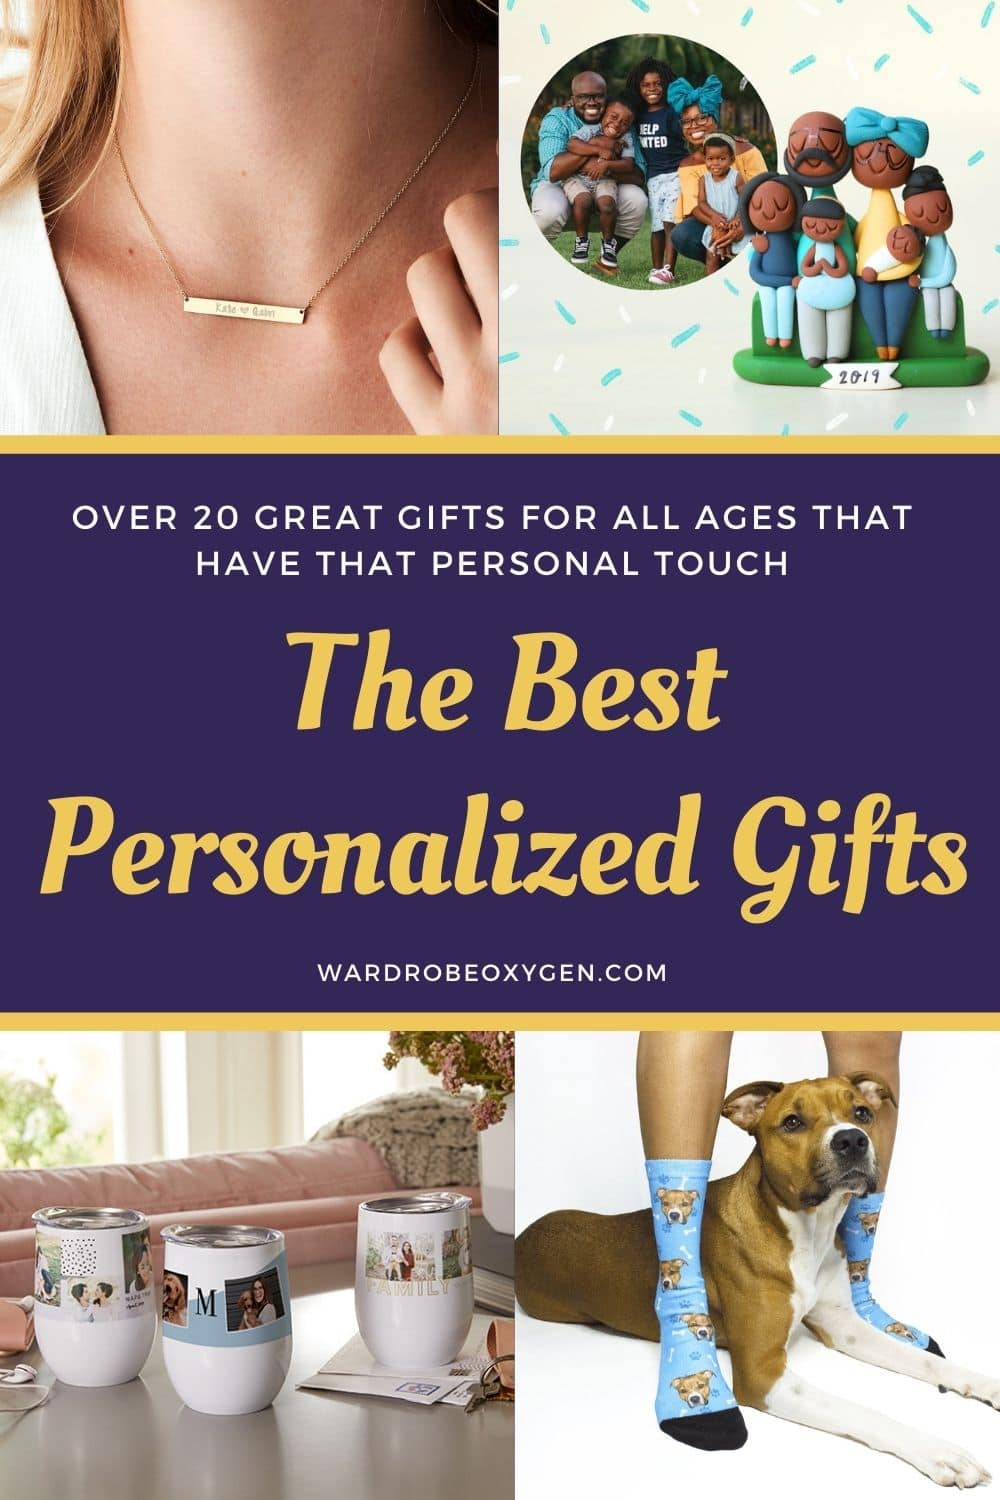 The Best Personalized Gifts: Over 20 Great Ideas